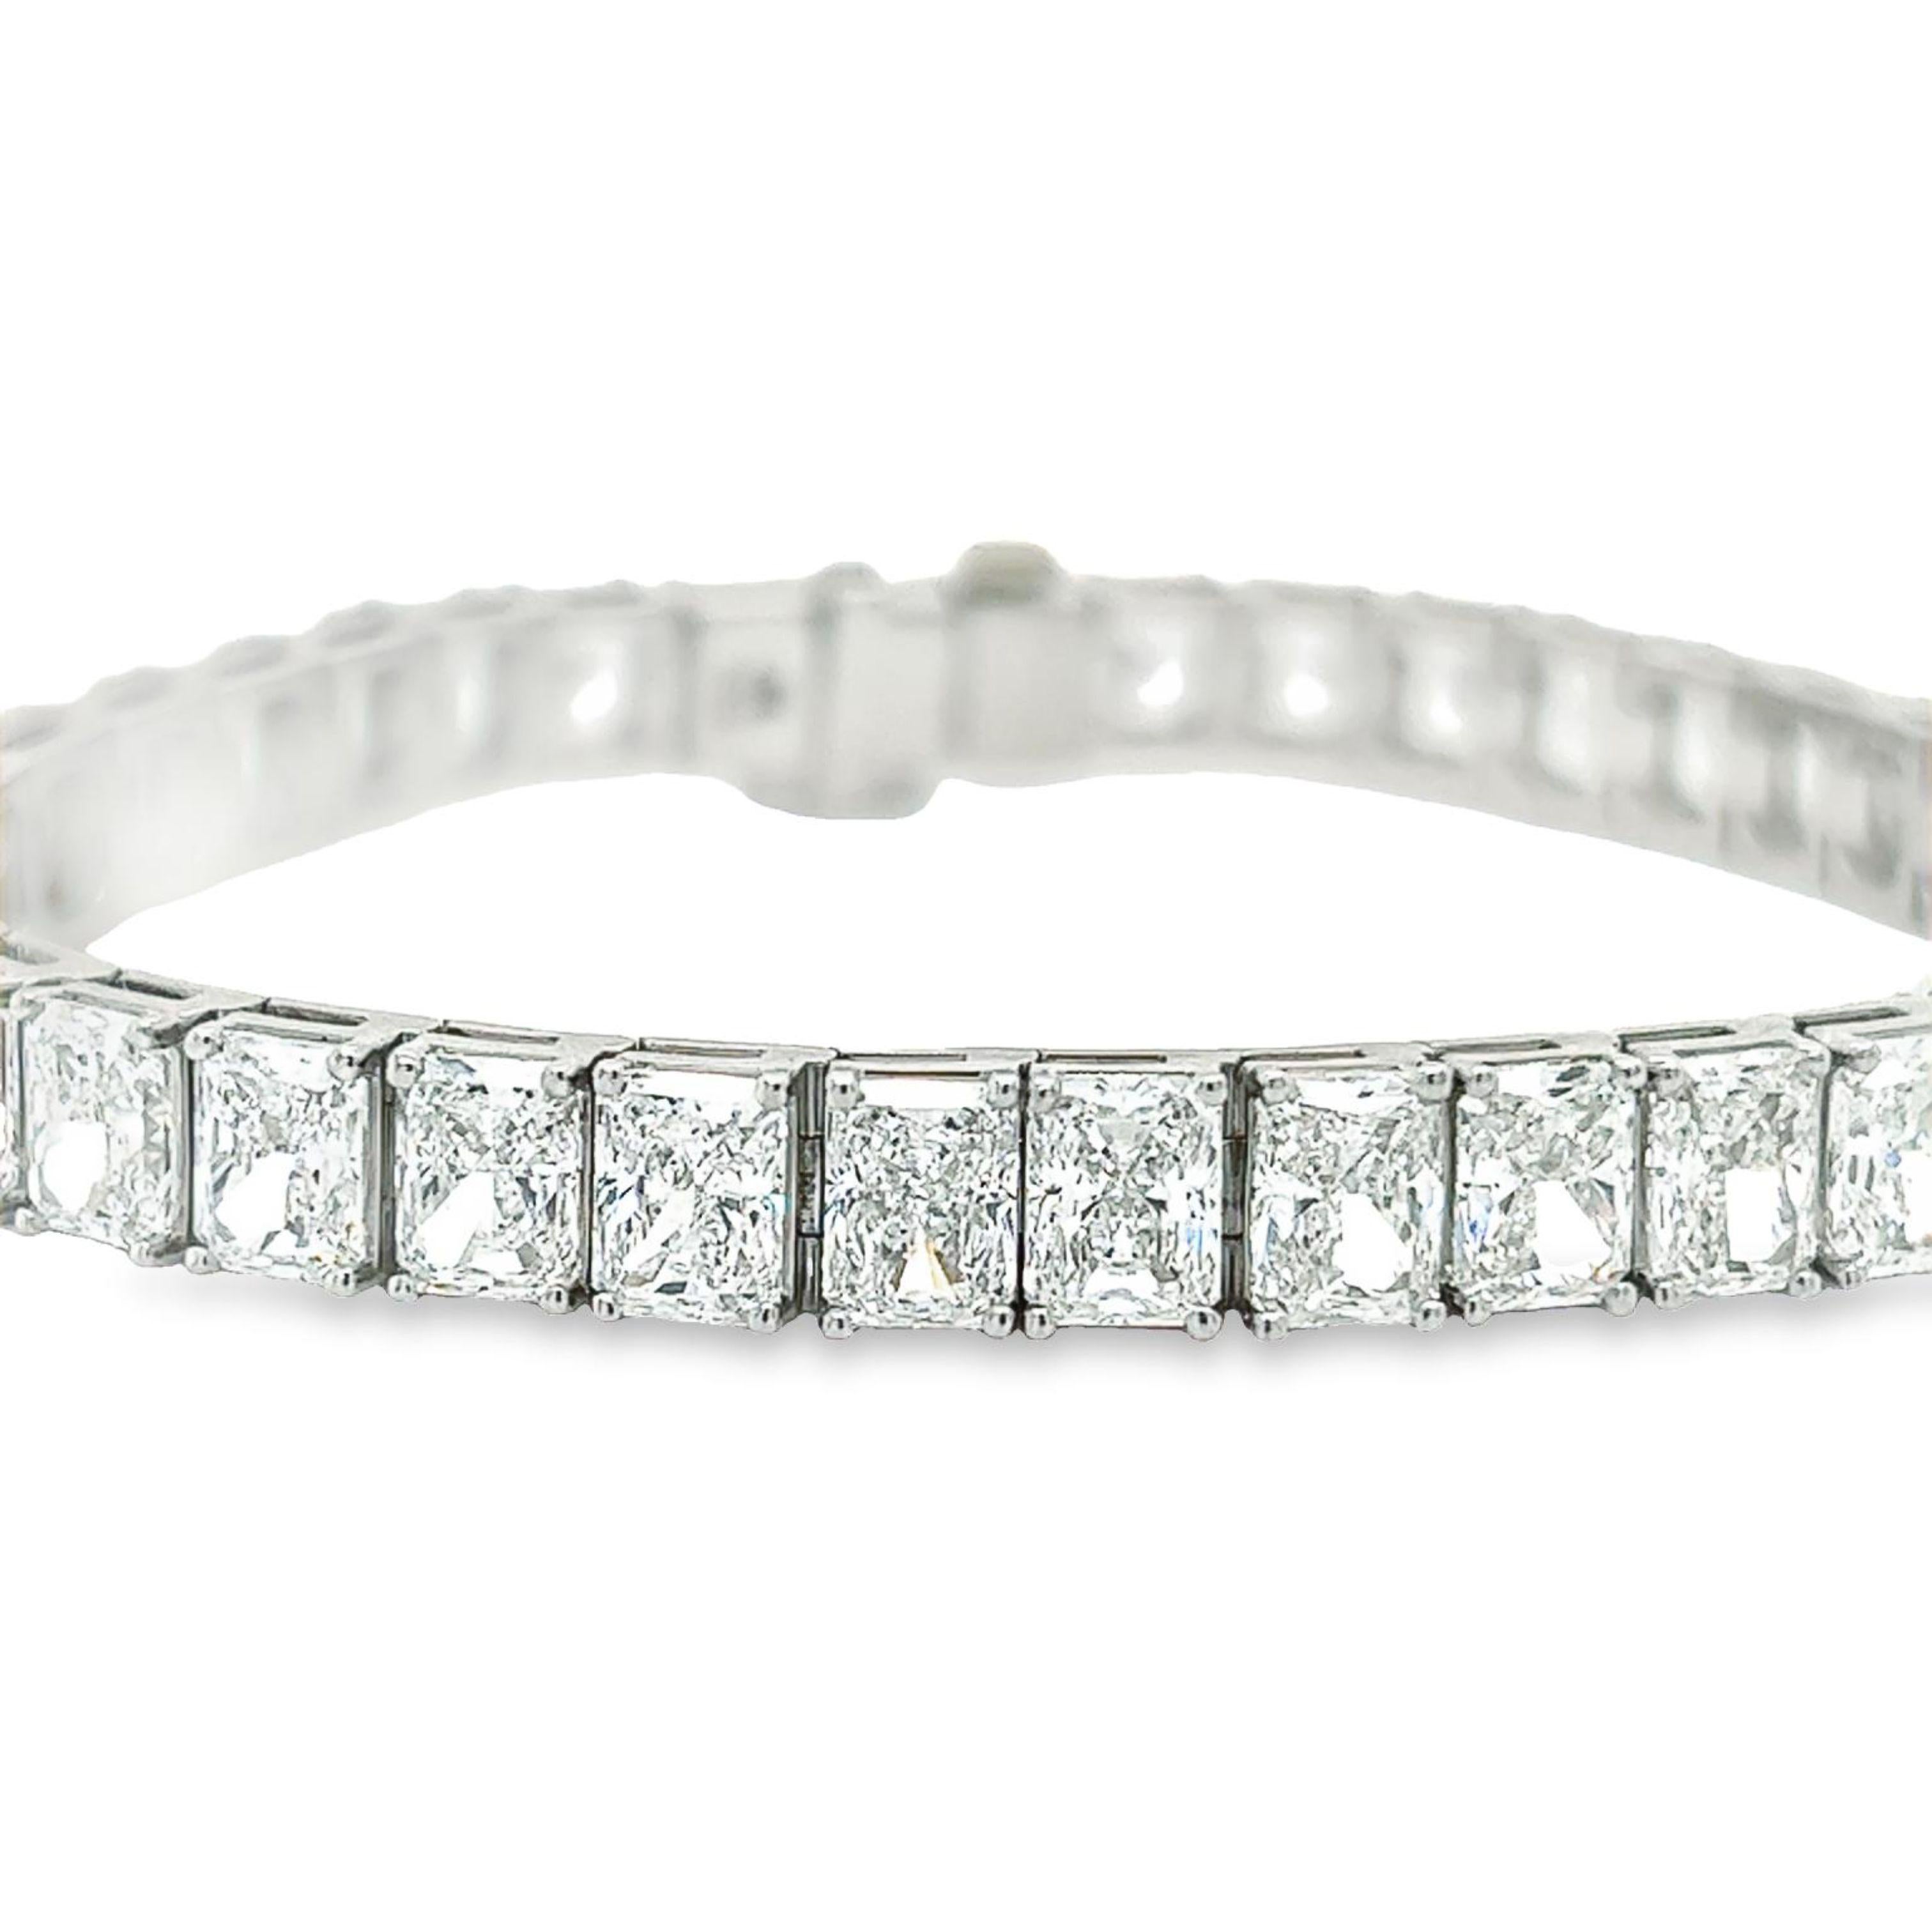 Rosenberg Diamonds & Co. 26.74 carat total weight Radiant shape 7 inch diamond tennis bracelet set in platinum. This beautiful straight line bracelet consists of .70 carats, D-G in color VVS1-VS2 in clarity. Each 38 stones are perfectly matched, top